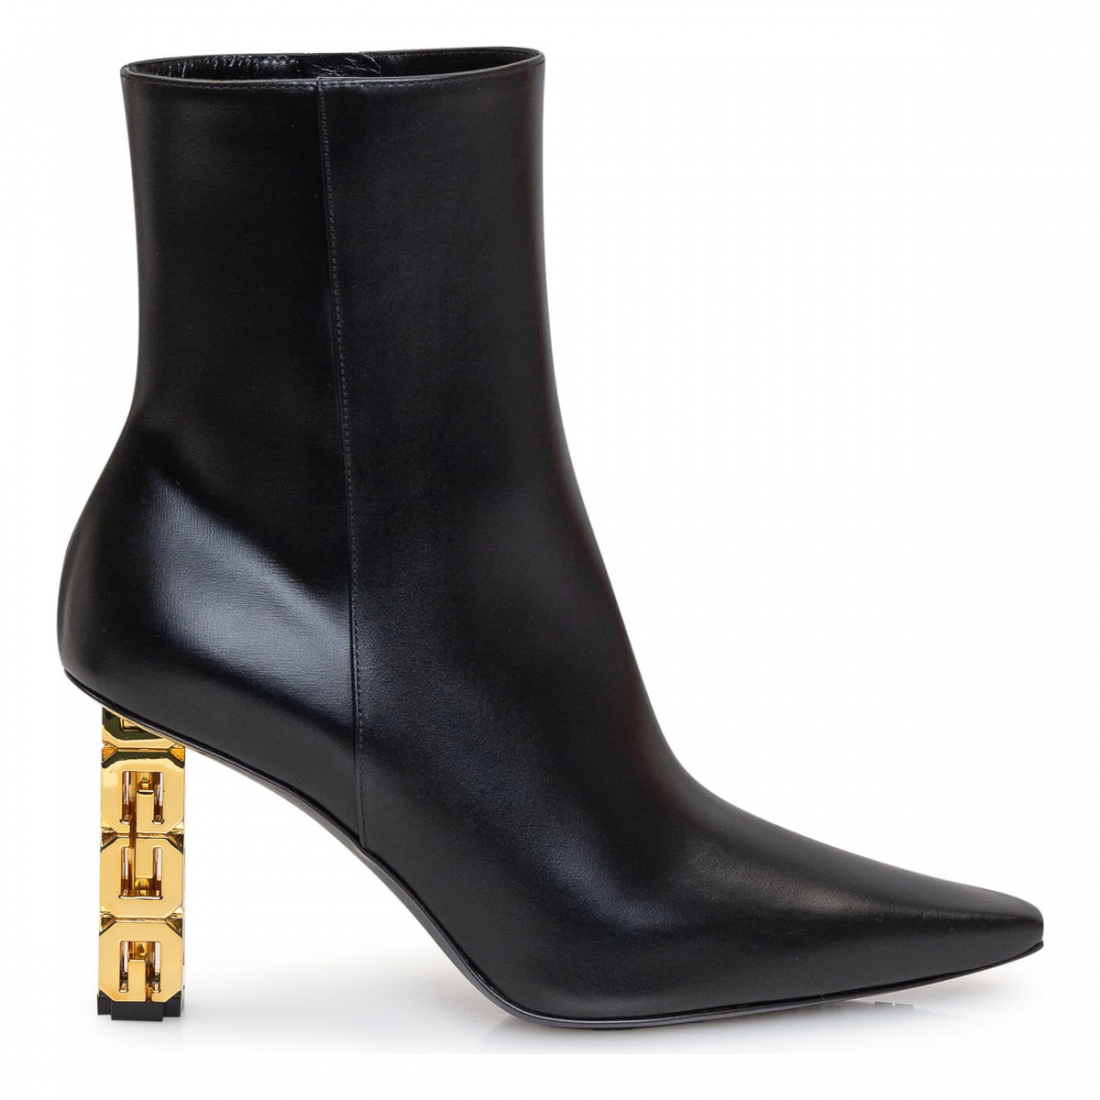 Women's 'G Cube' Ankle Boots